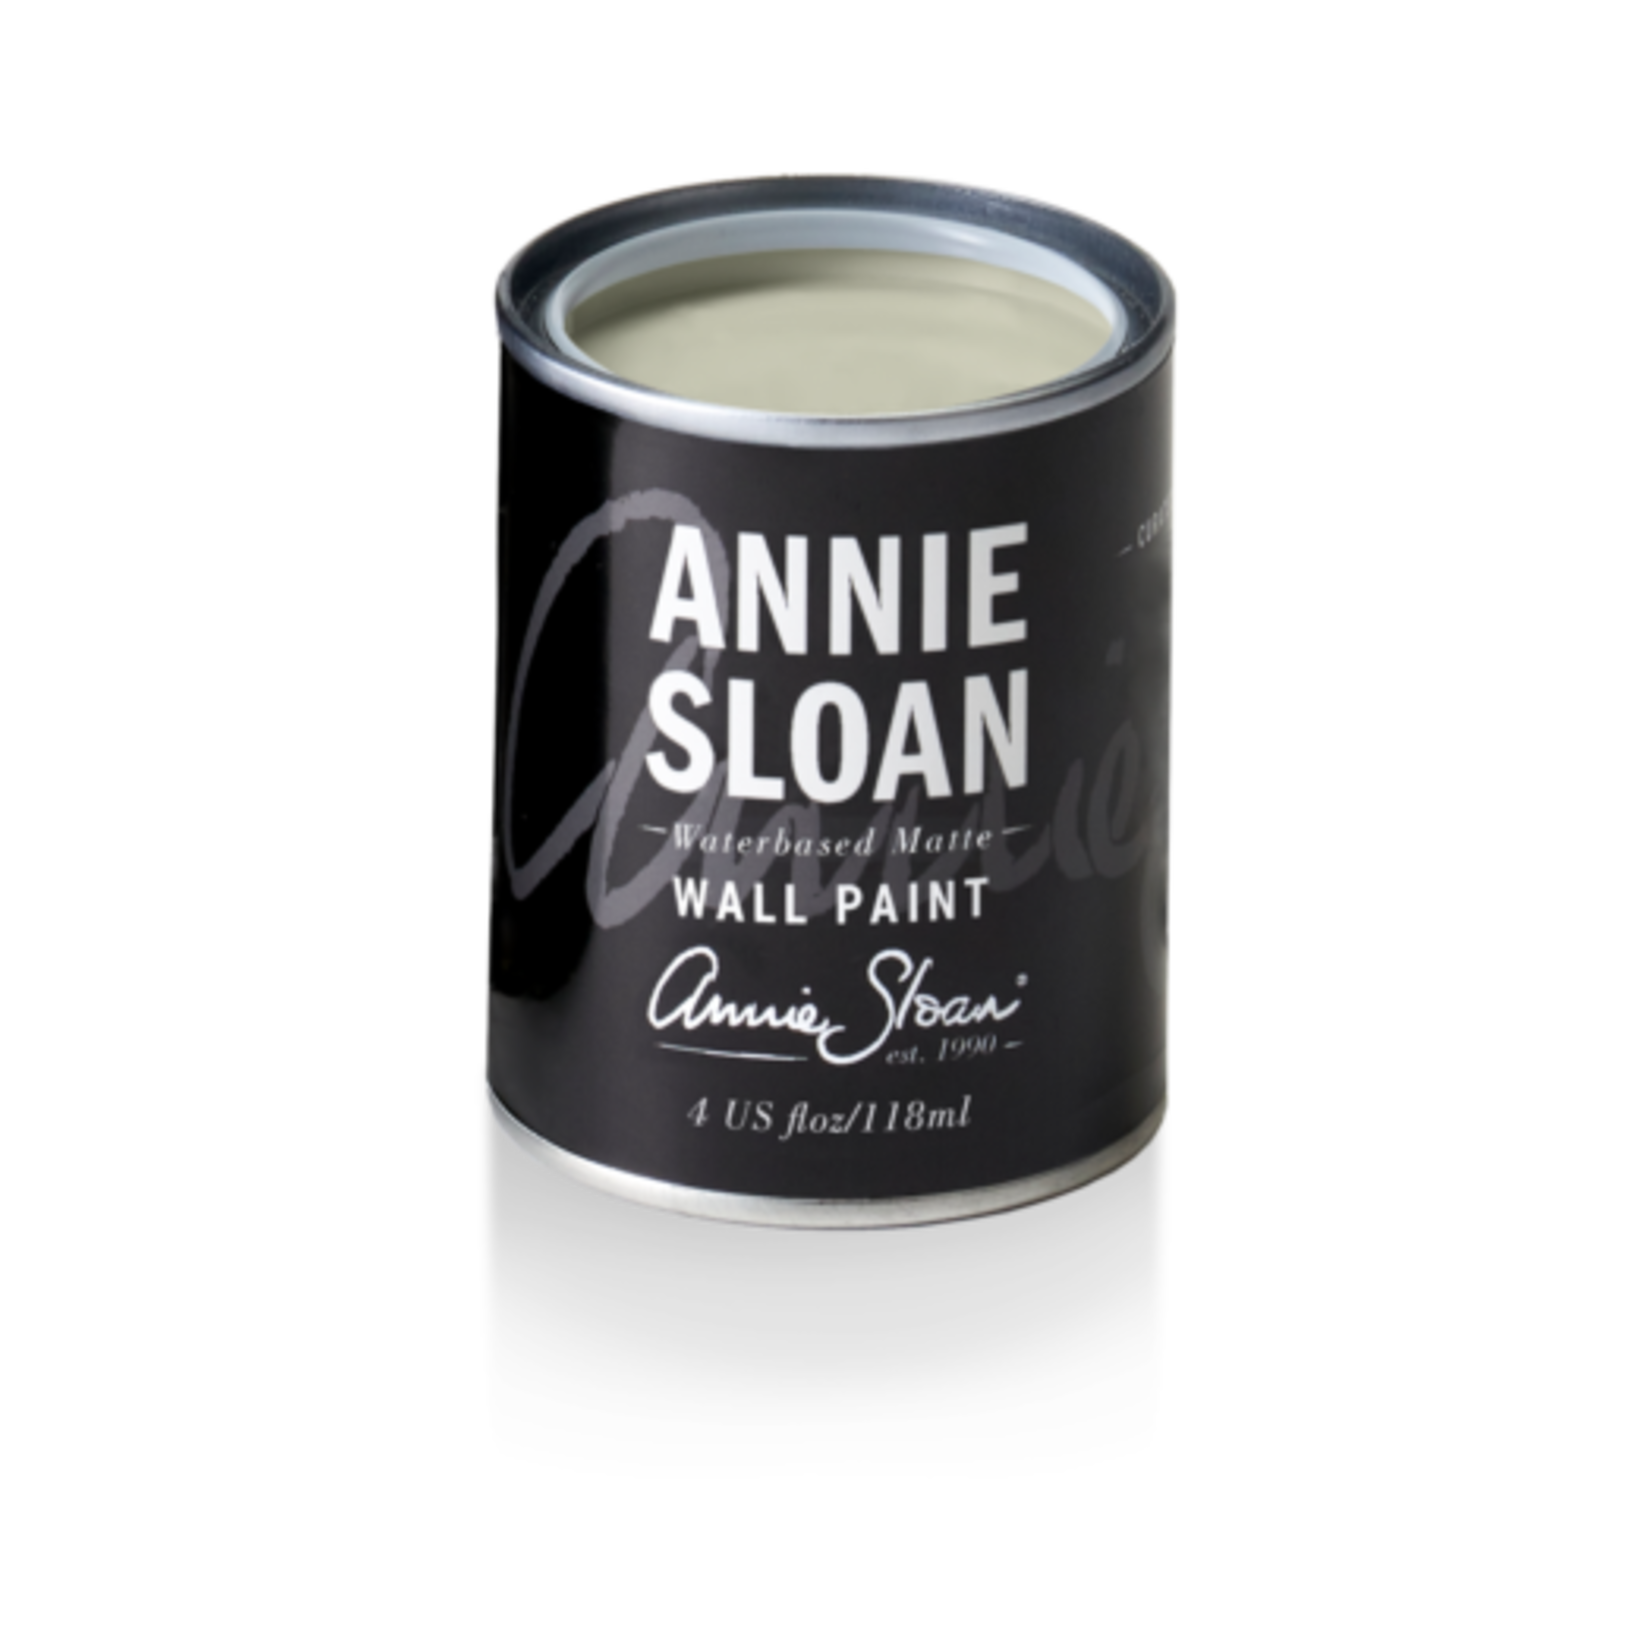 Annie Sloan Wall Paint 4oz Sample Can Cotswald Green